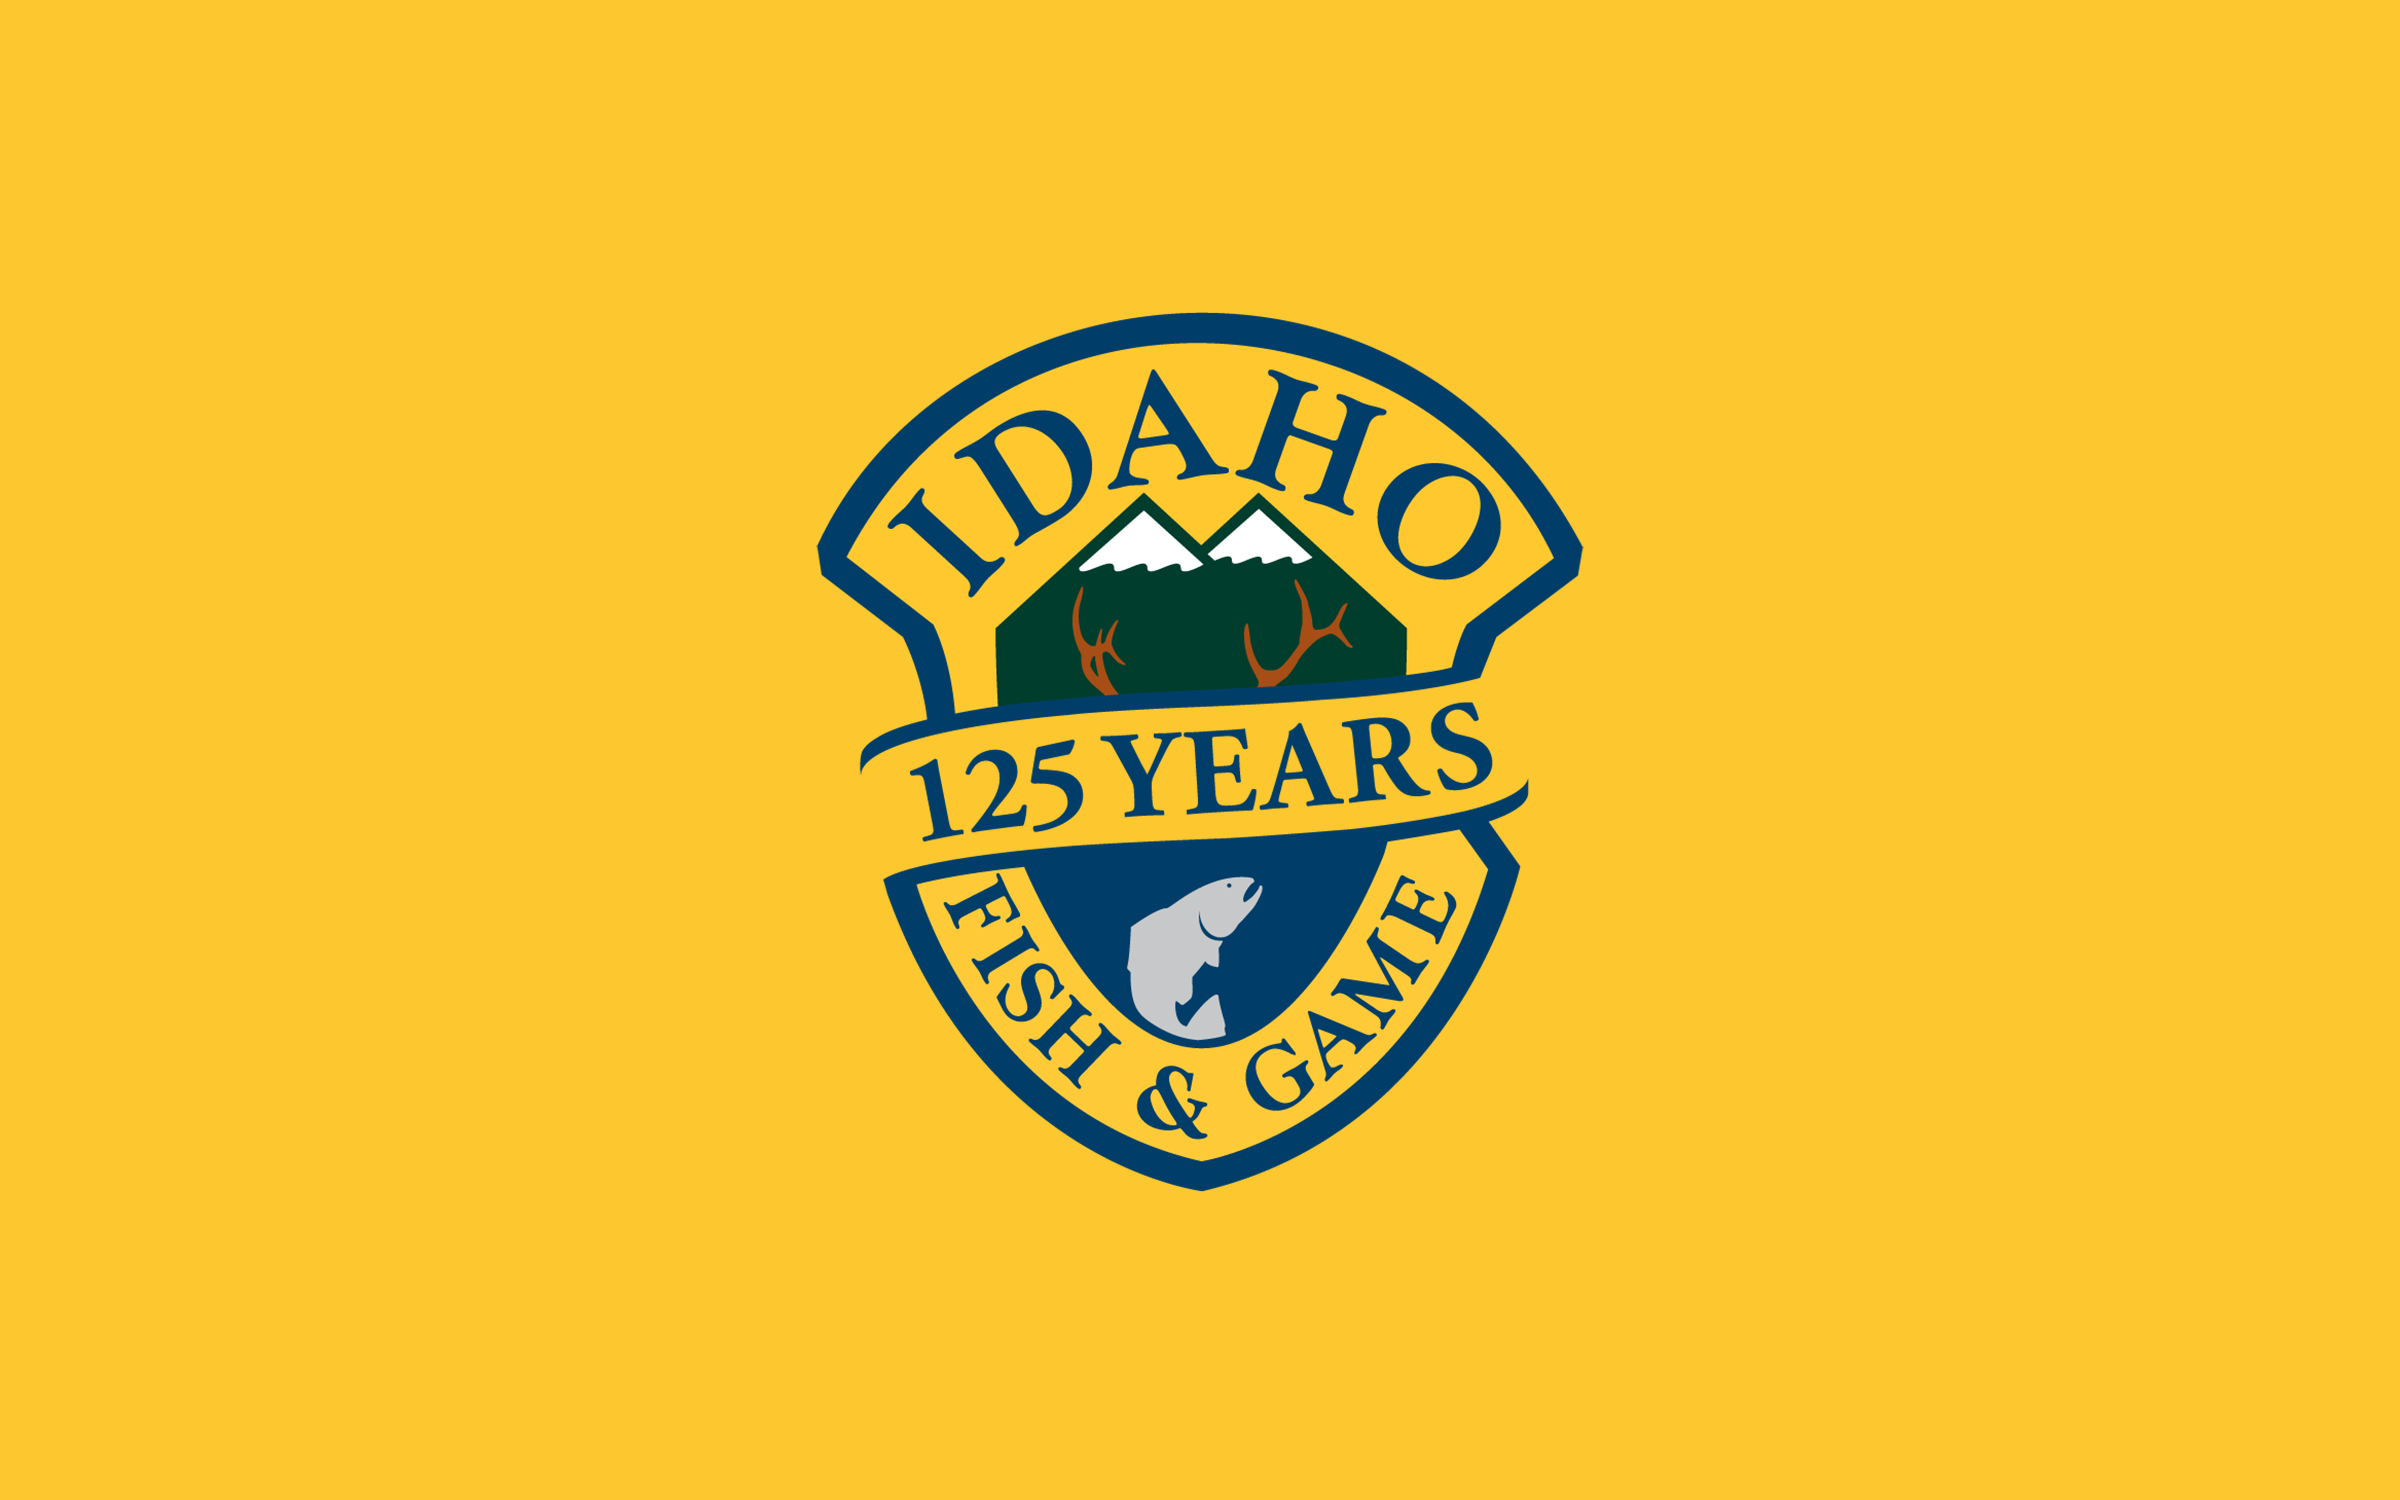 125th anniversary Fish and Game logo on yellow background